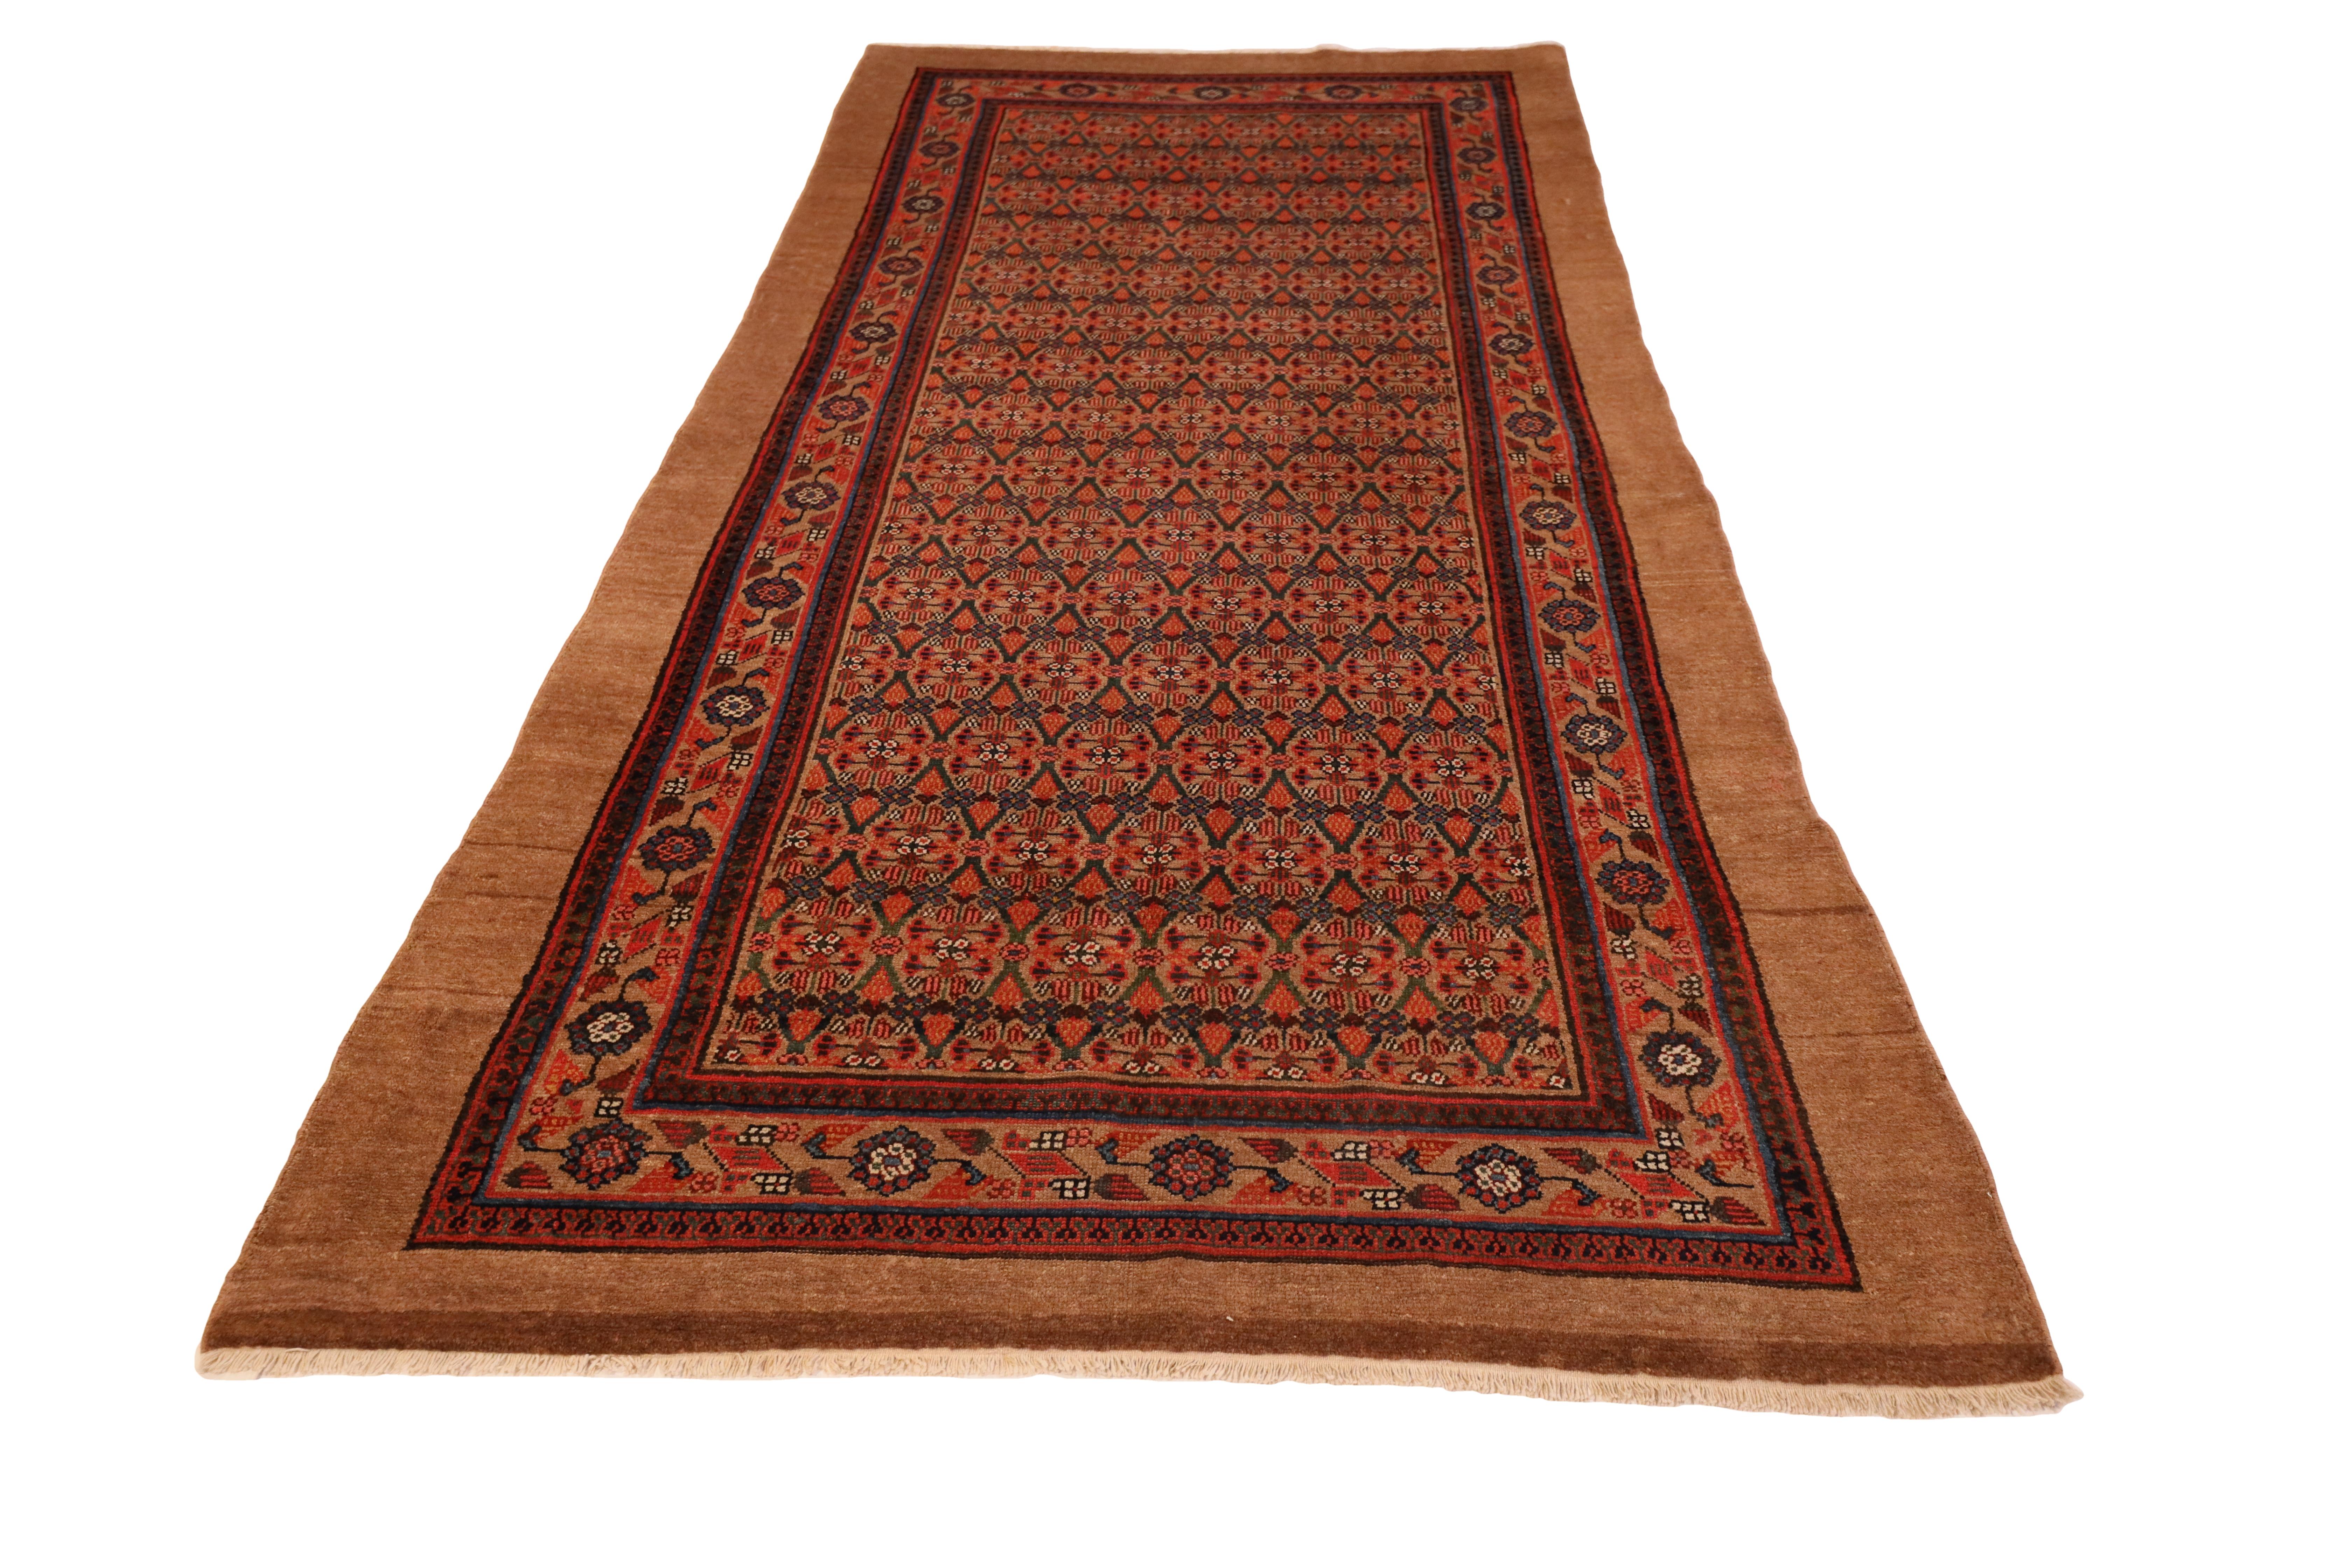 Camel-Hair Hamedan Rug, Beige Blue Red - 5 x 10 In Good Condition For Sale In New York, NY